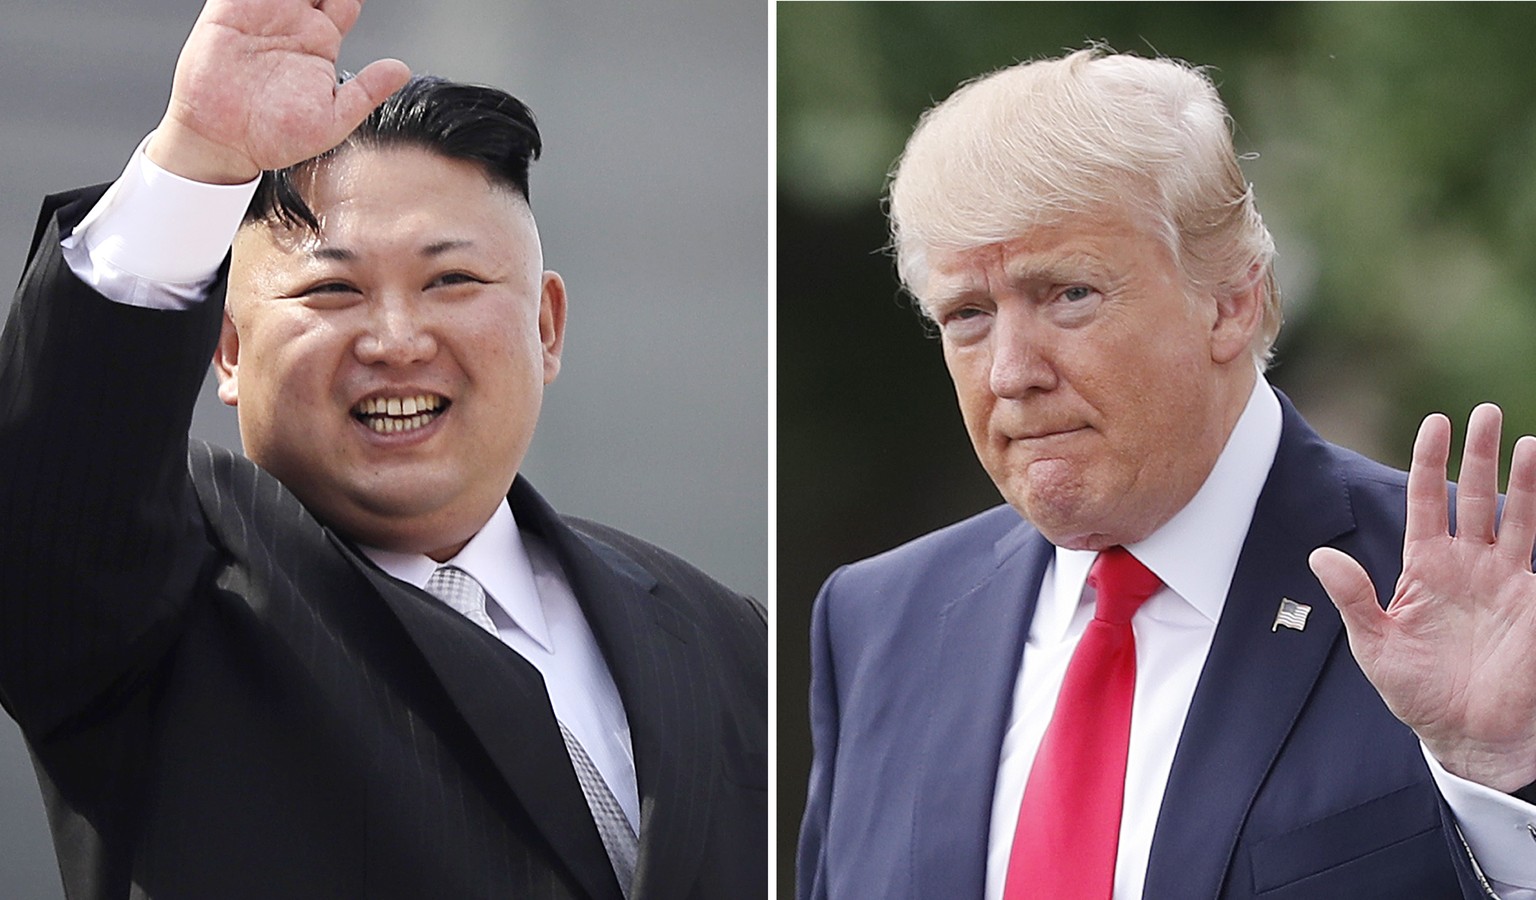 FILE - This combination of photos shows North Korean leader Kim Jong Un on April 15, 2017, in Pyongyang, North Korea, left, and U.S. President Donald Trump in Washington on April 29, 2017. The notion  ...